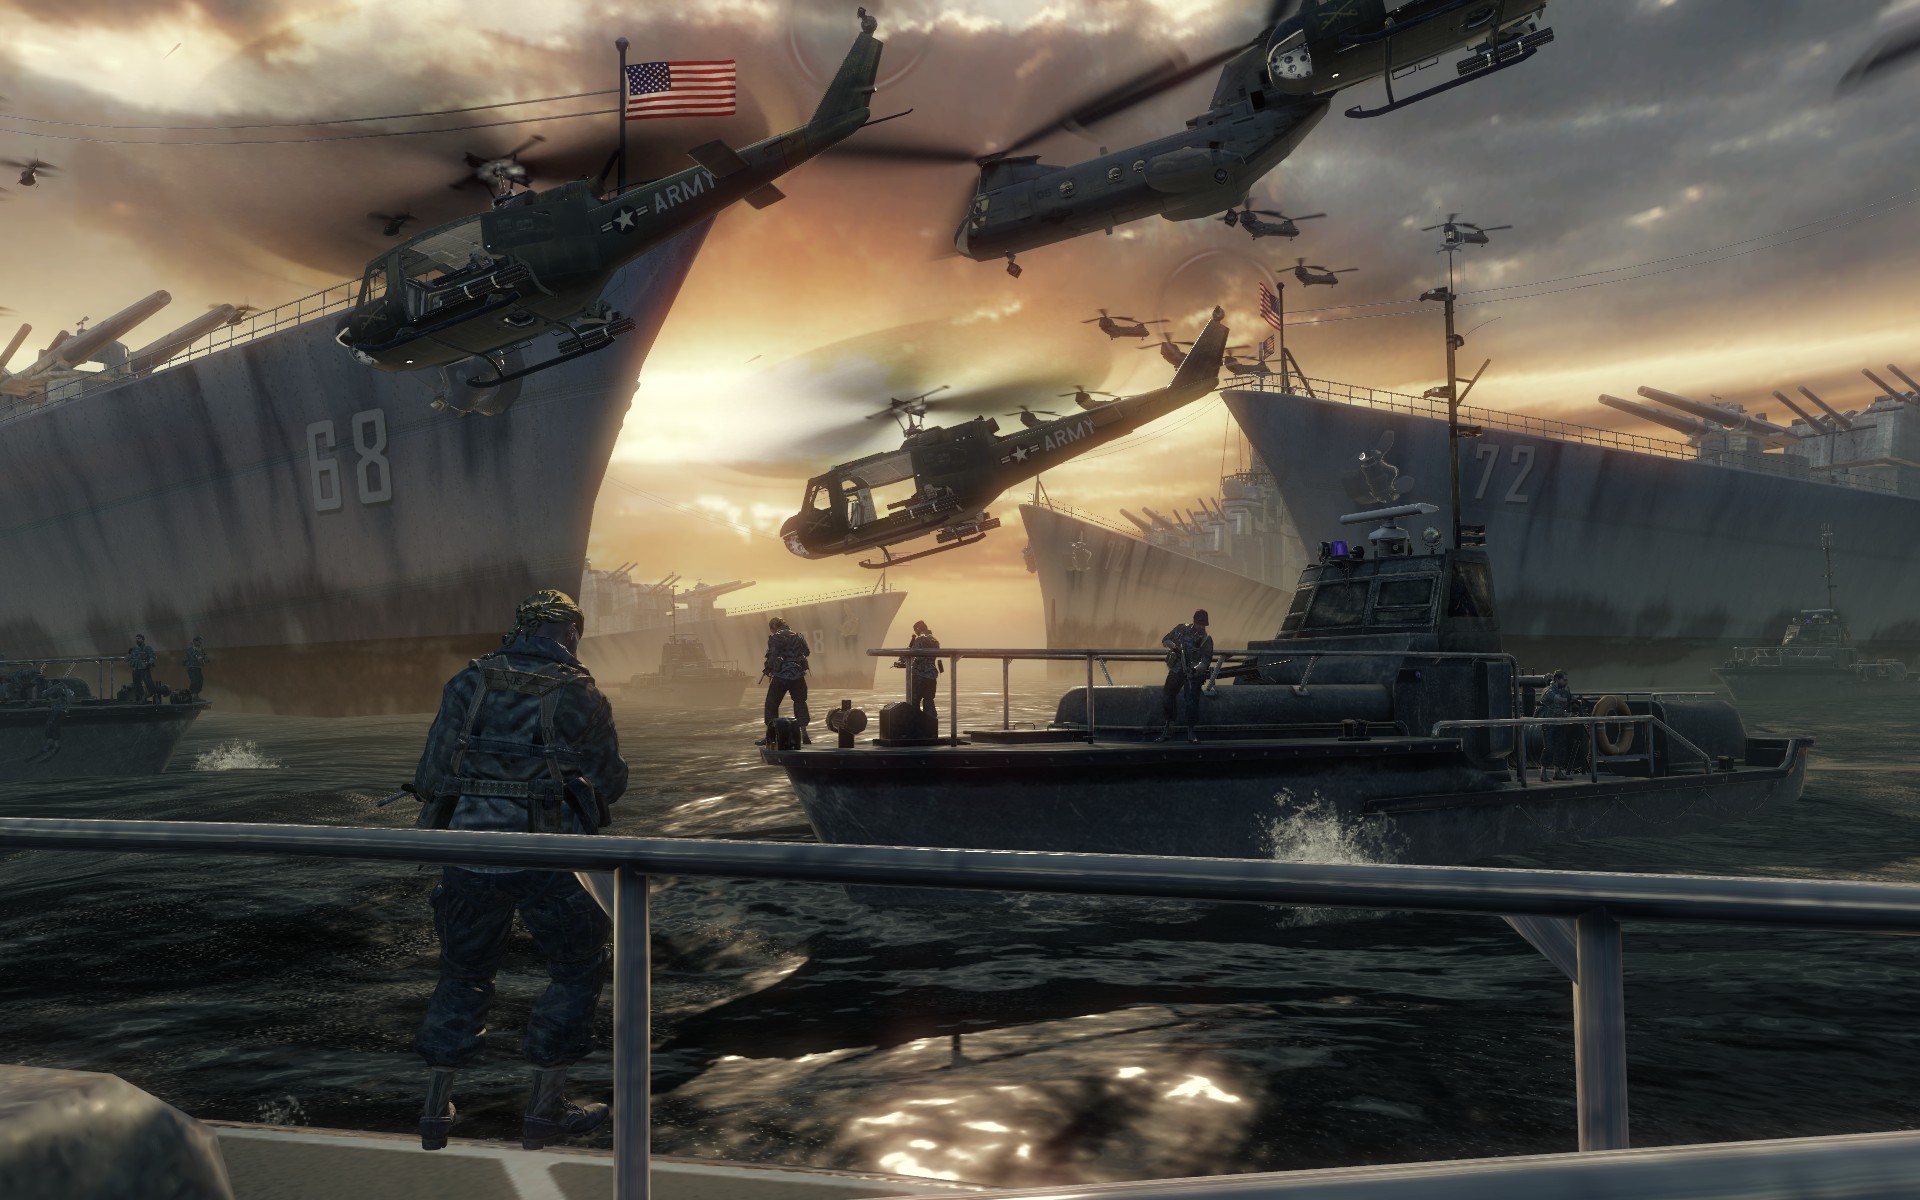 water, soldiers, video games, ocean, Call of Duty, Xbox, ships, PC, weapons, boats, US Army, Playstation 3 - desktop wallpaper